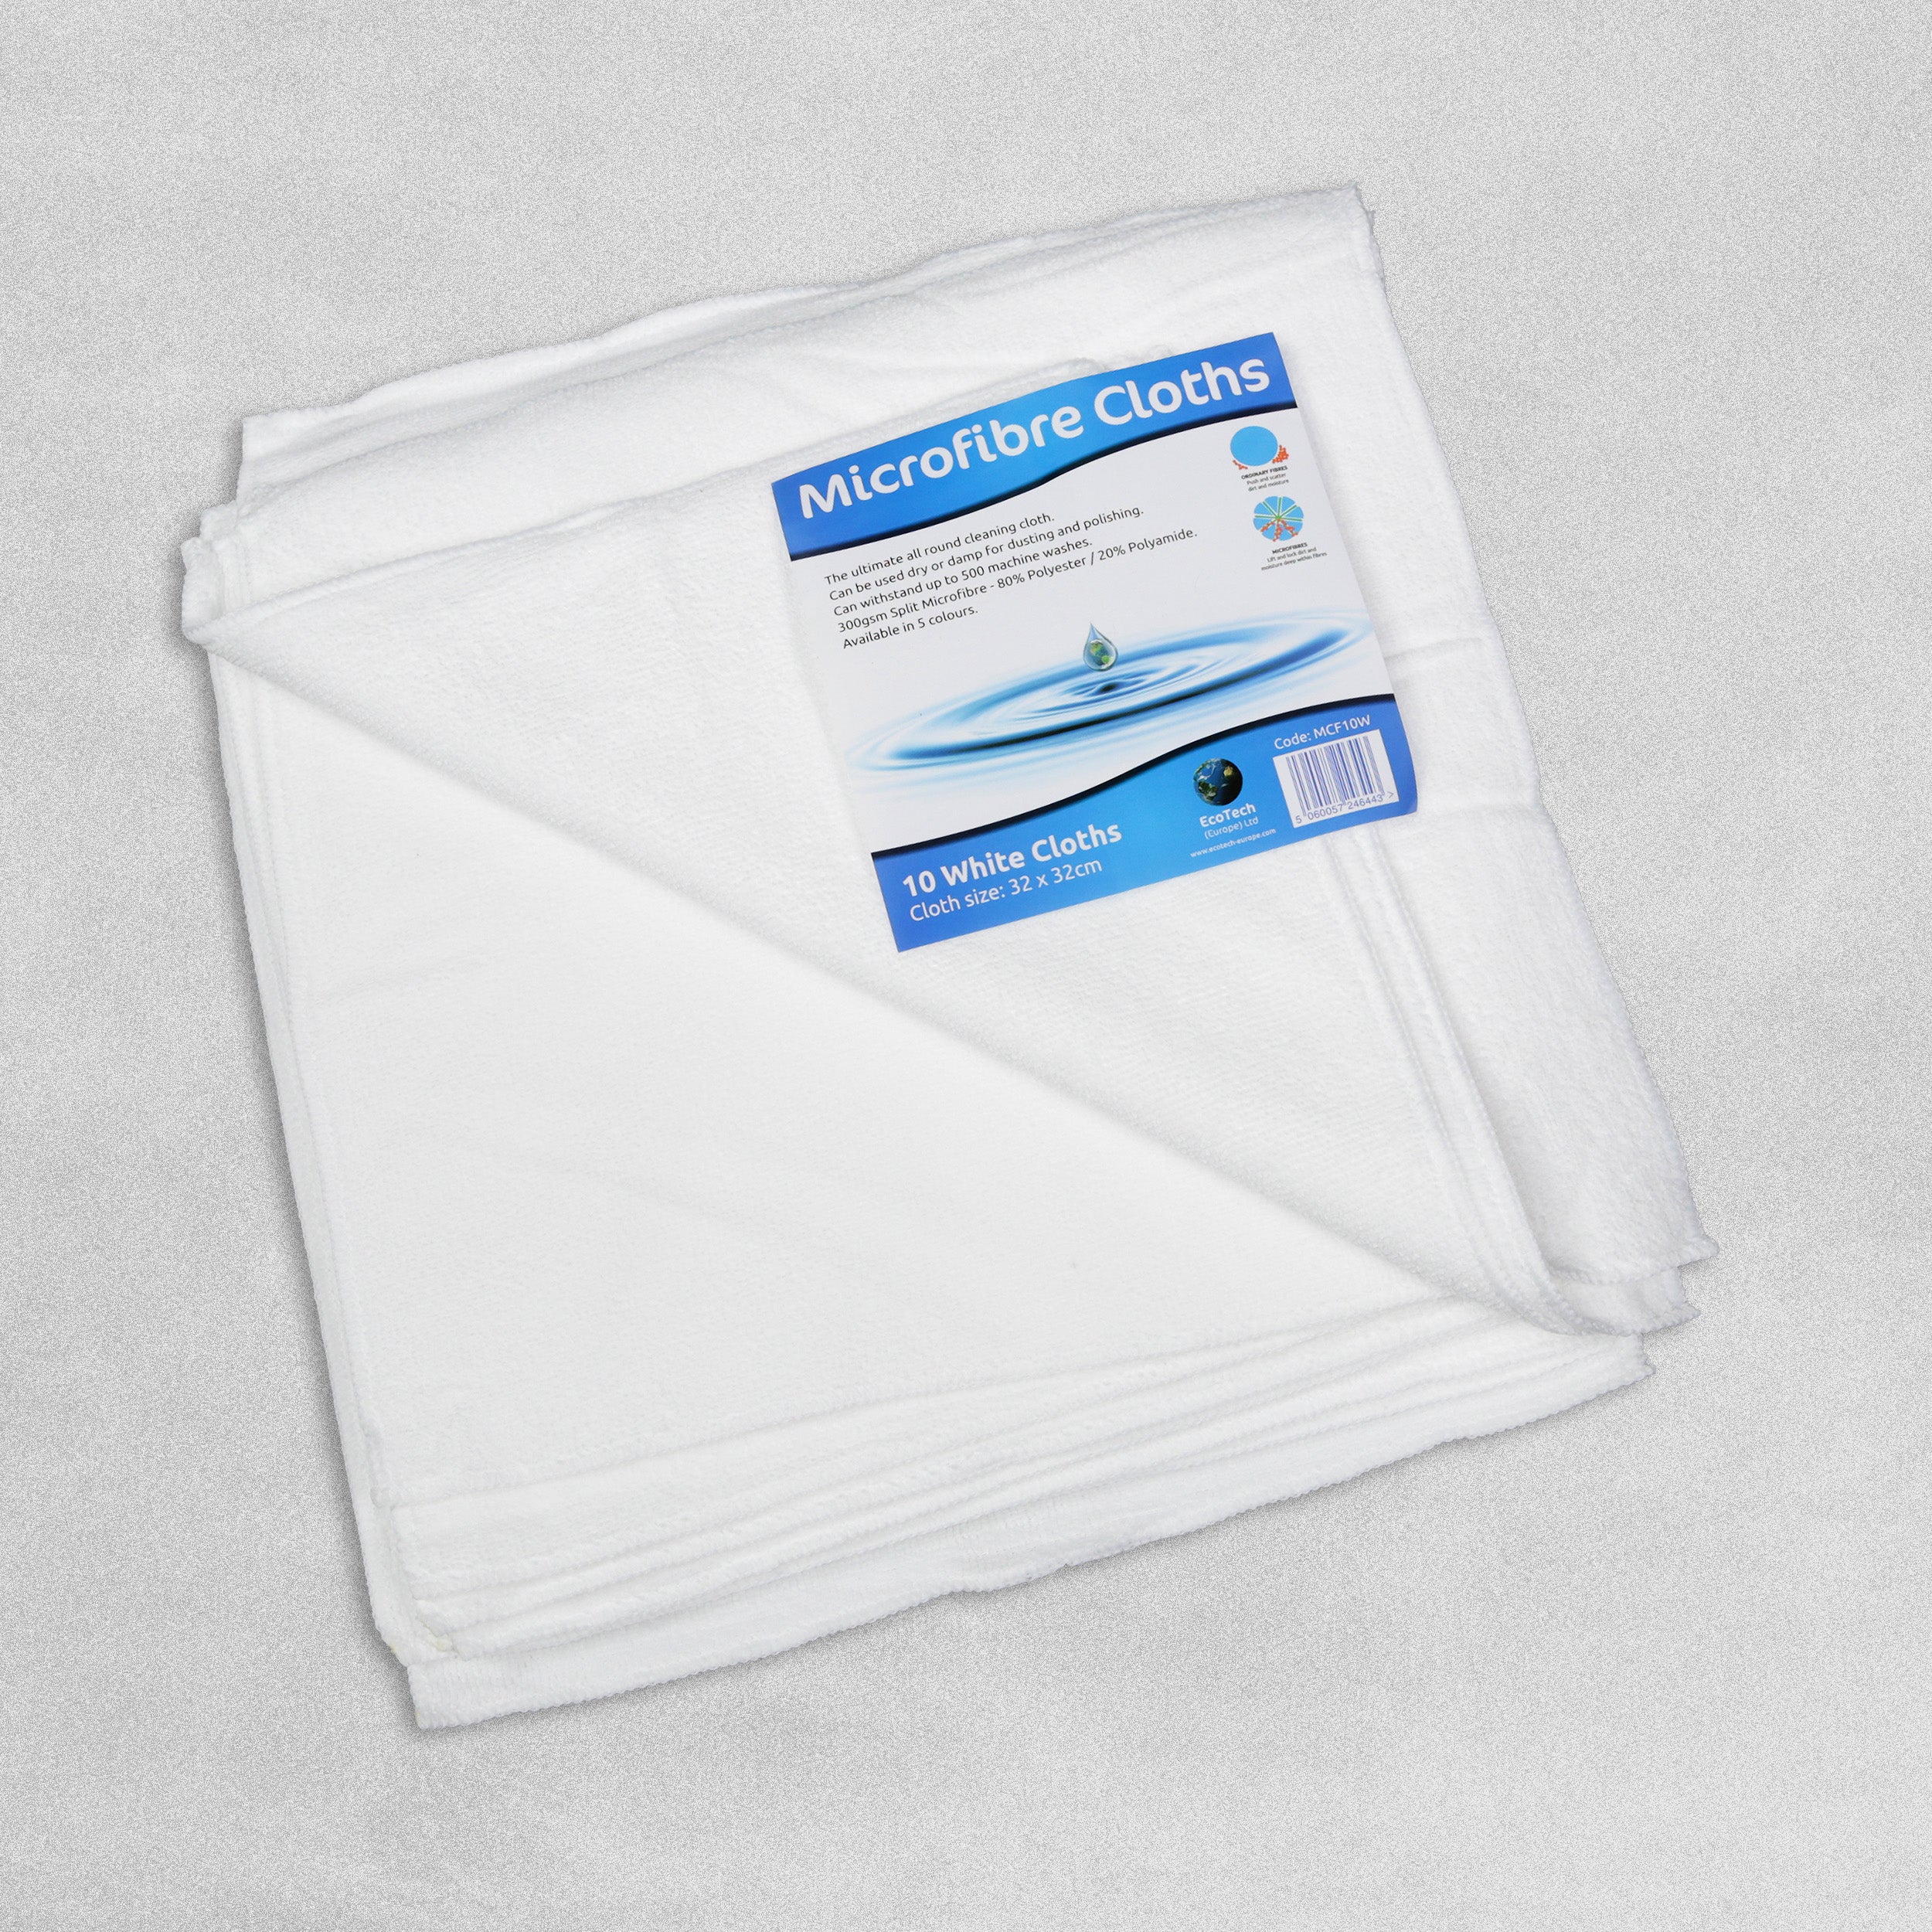 Microfibre Cloths - Pack of 10